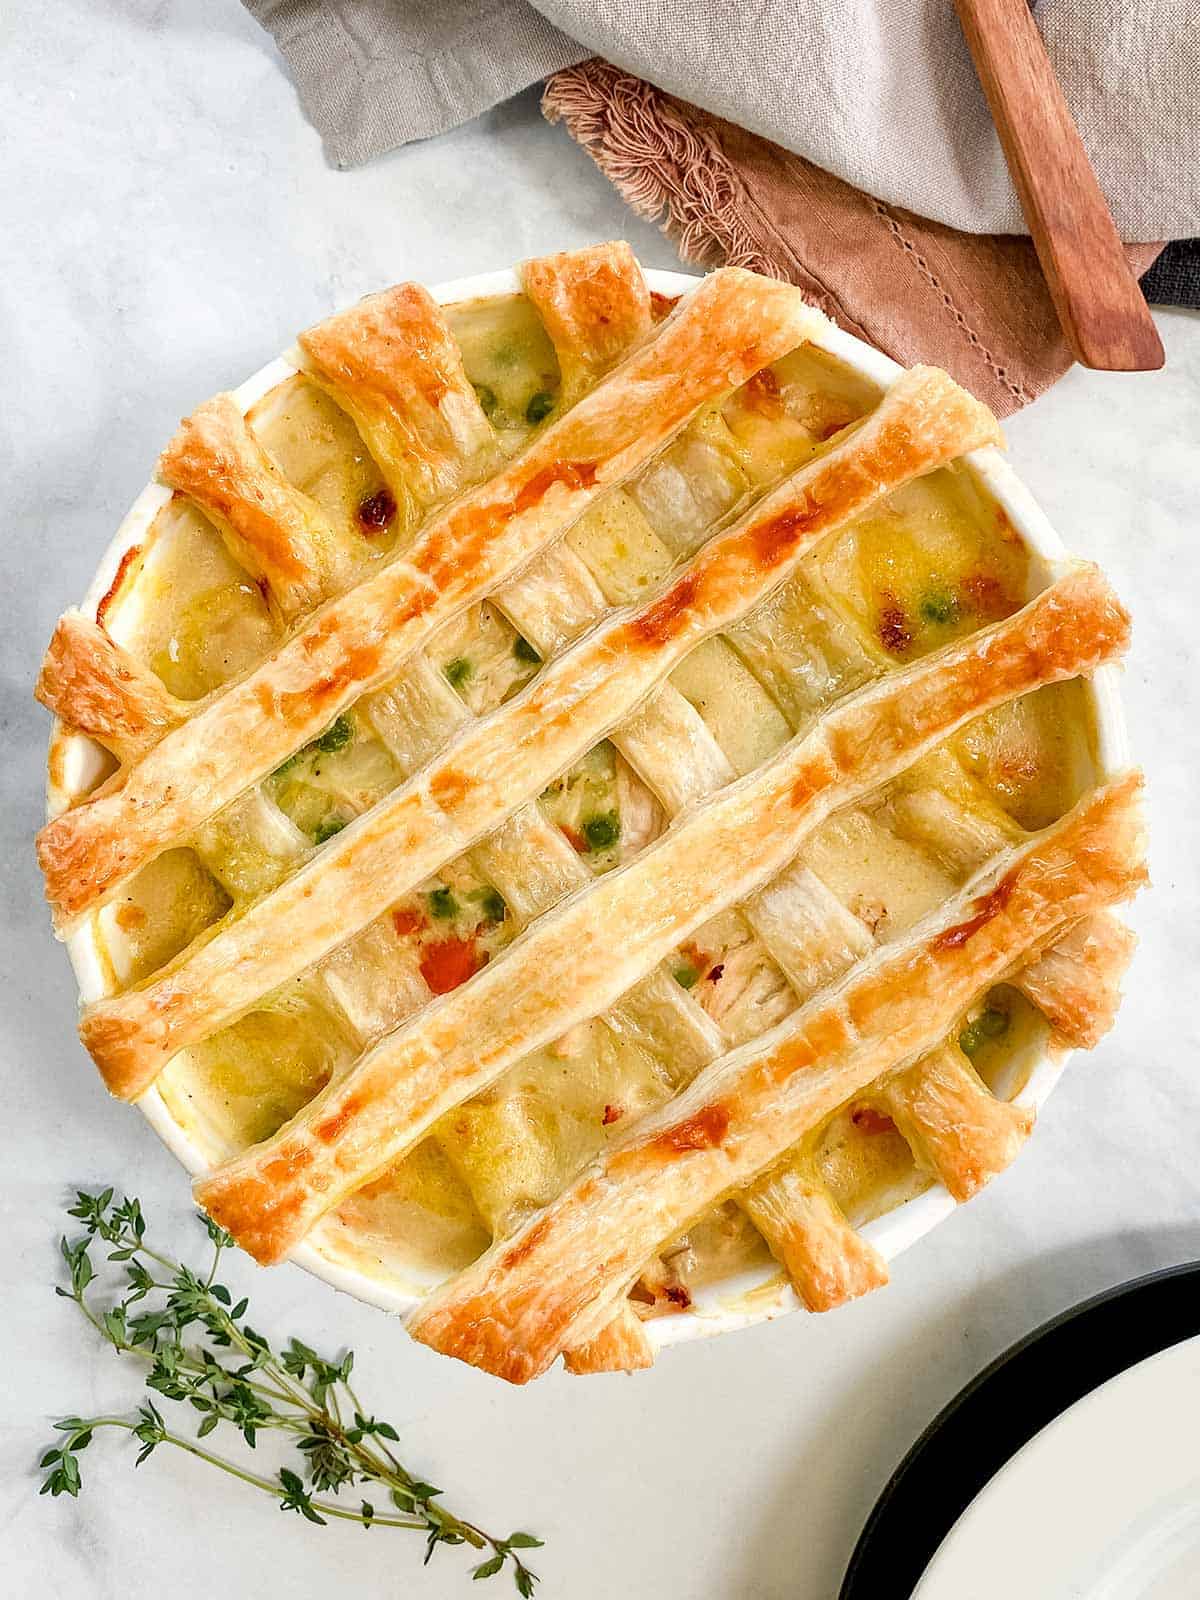 A dish of chicken pot pie with a pastry latticed top and a sprig of thyme